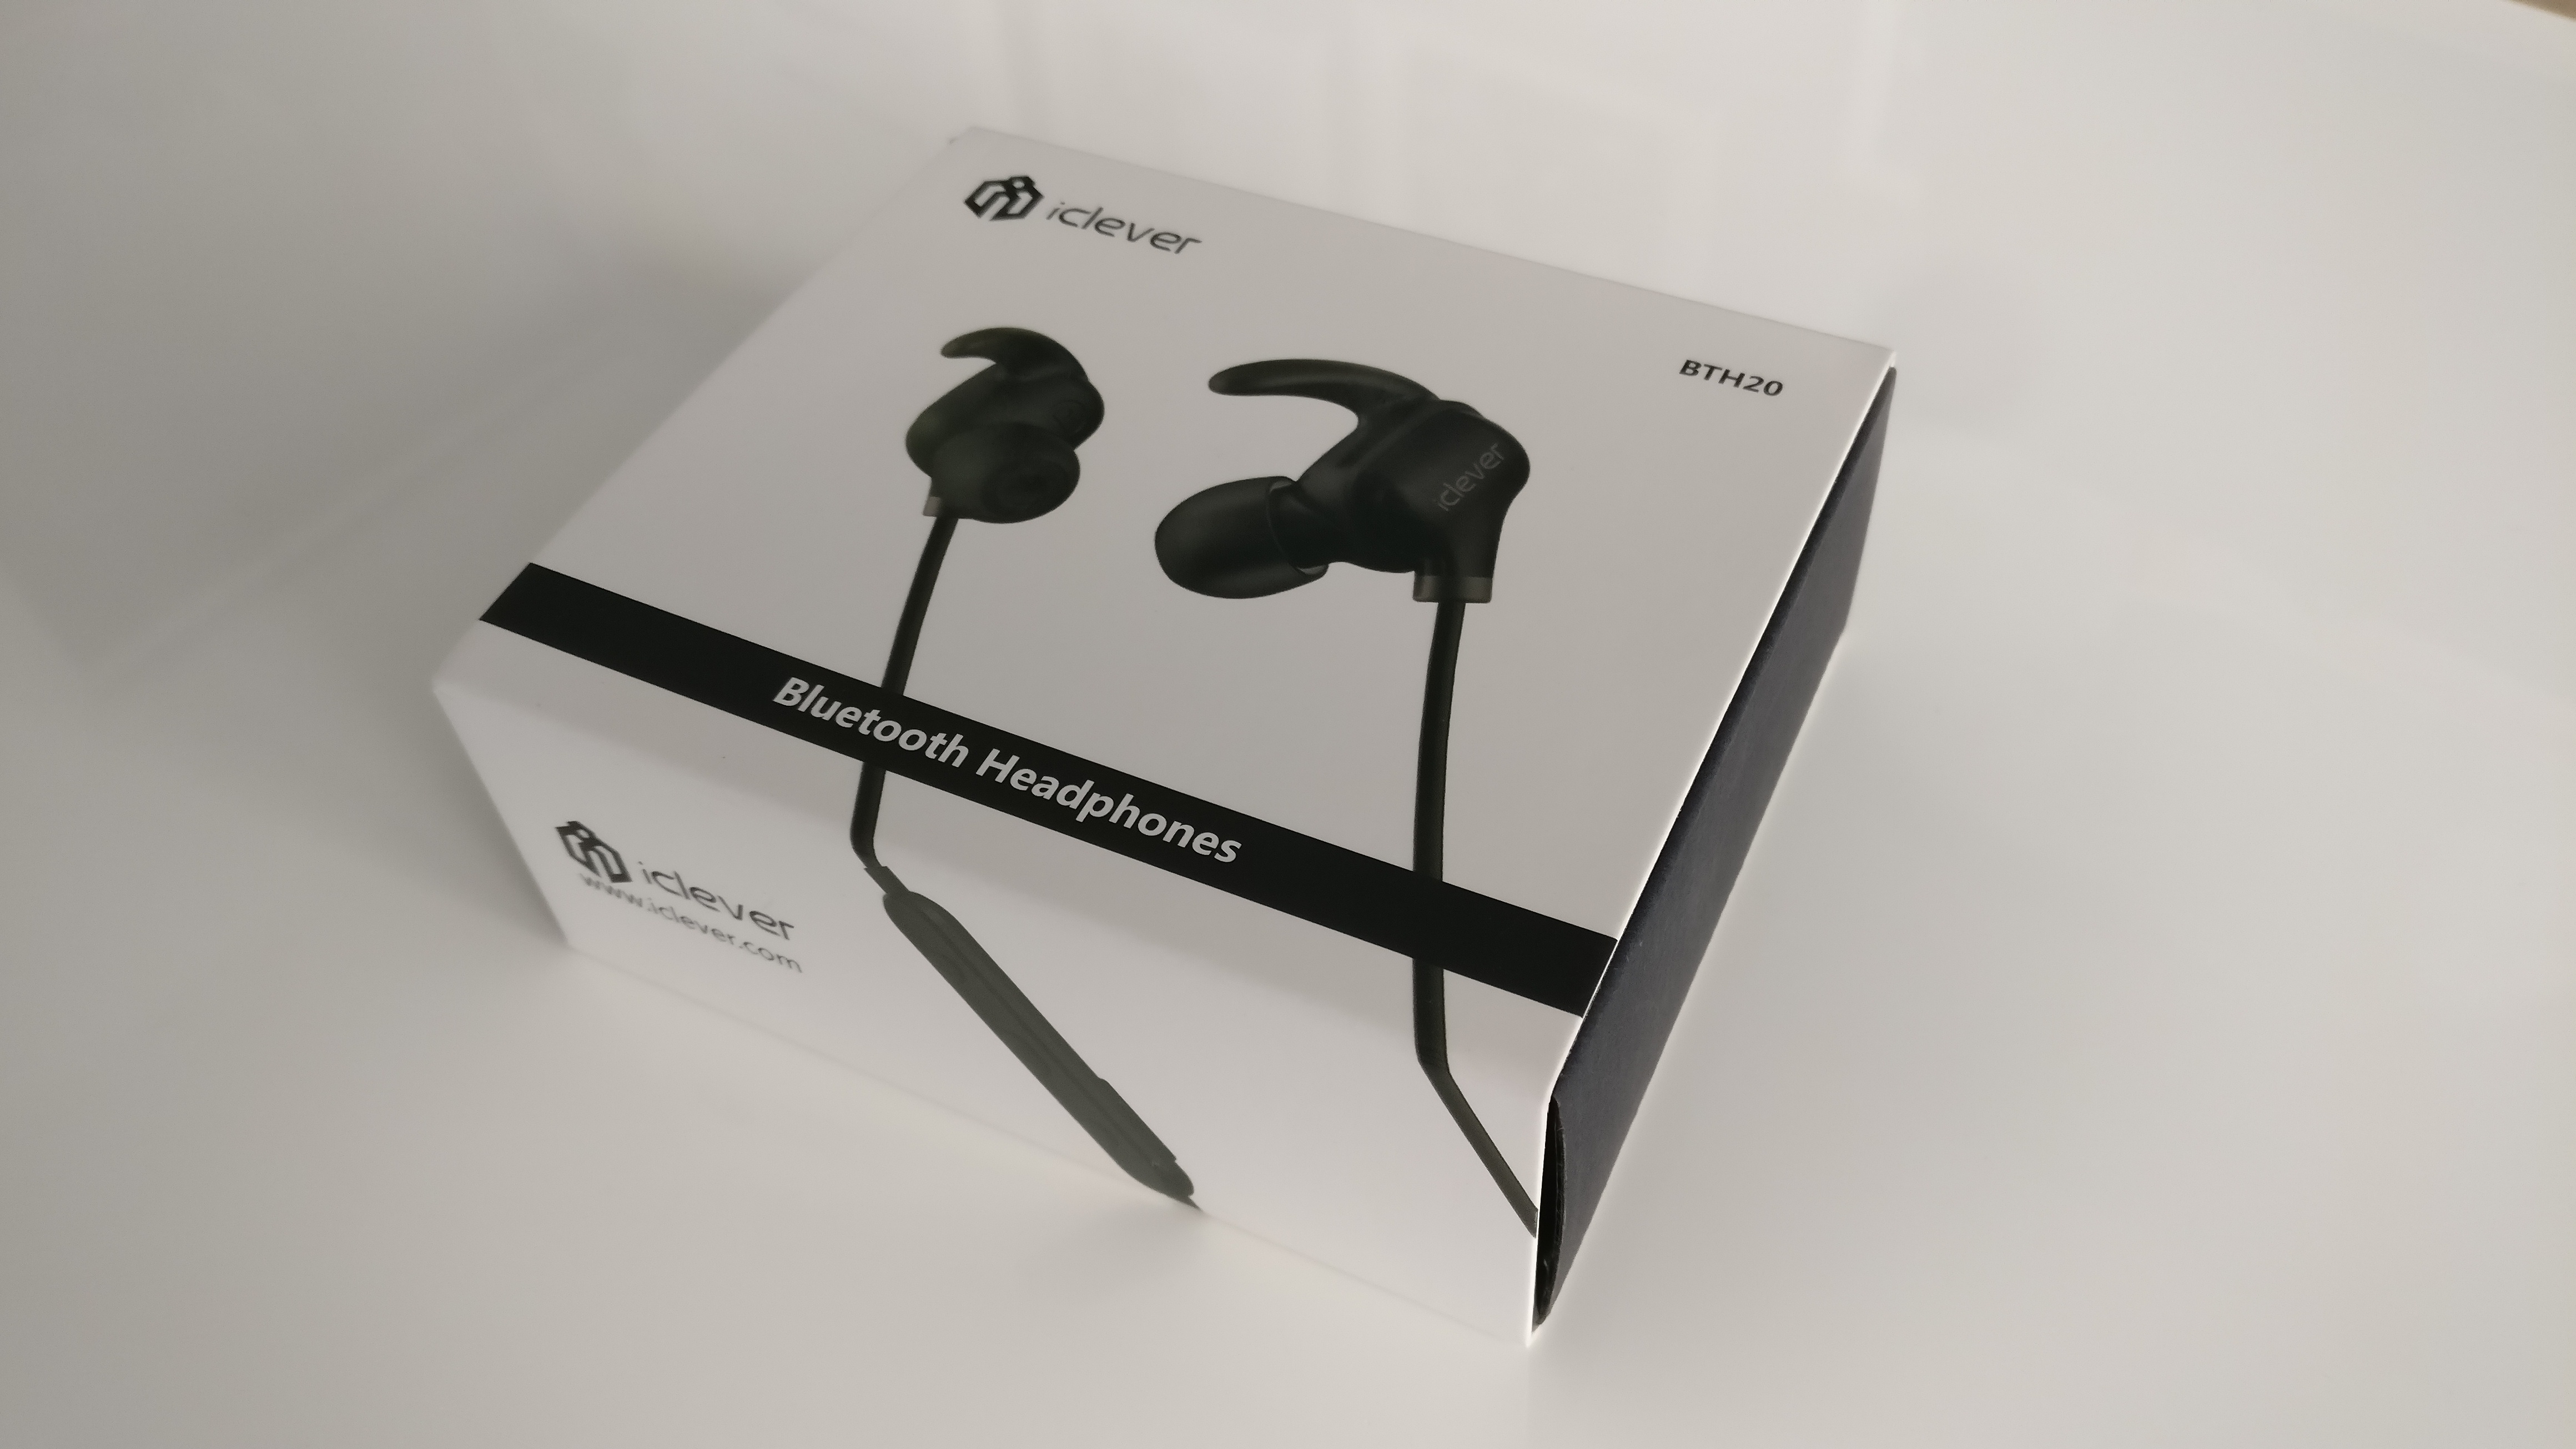 iClever BTH20 Bluetooth Headphones Review